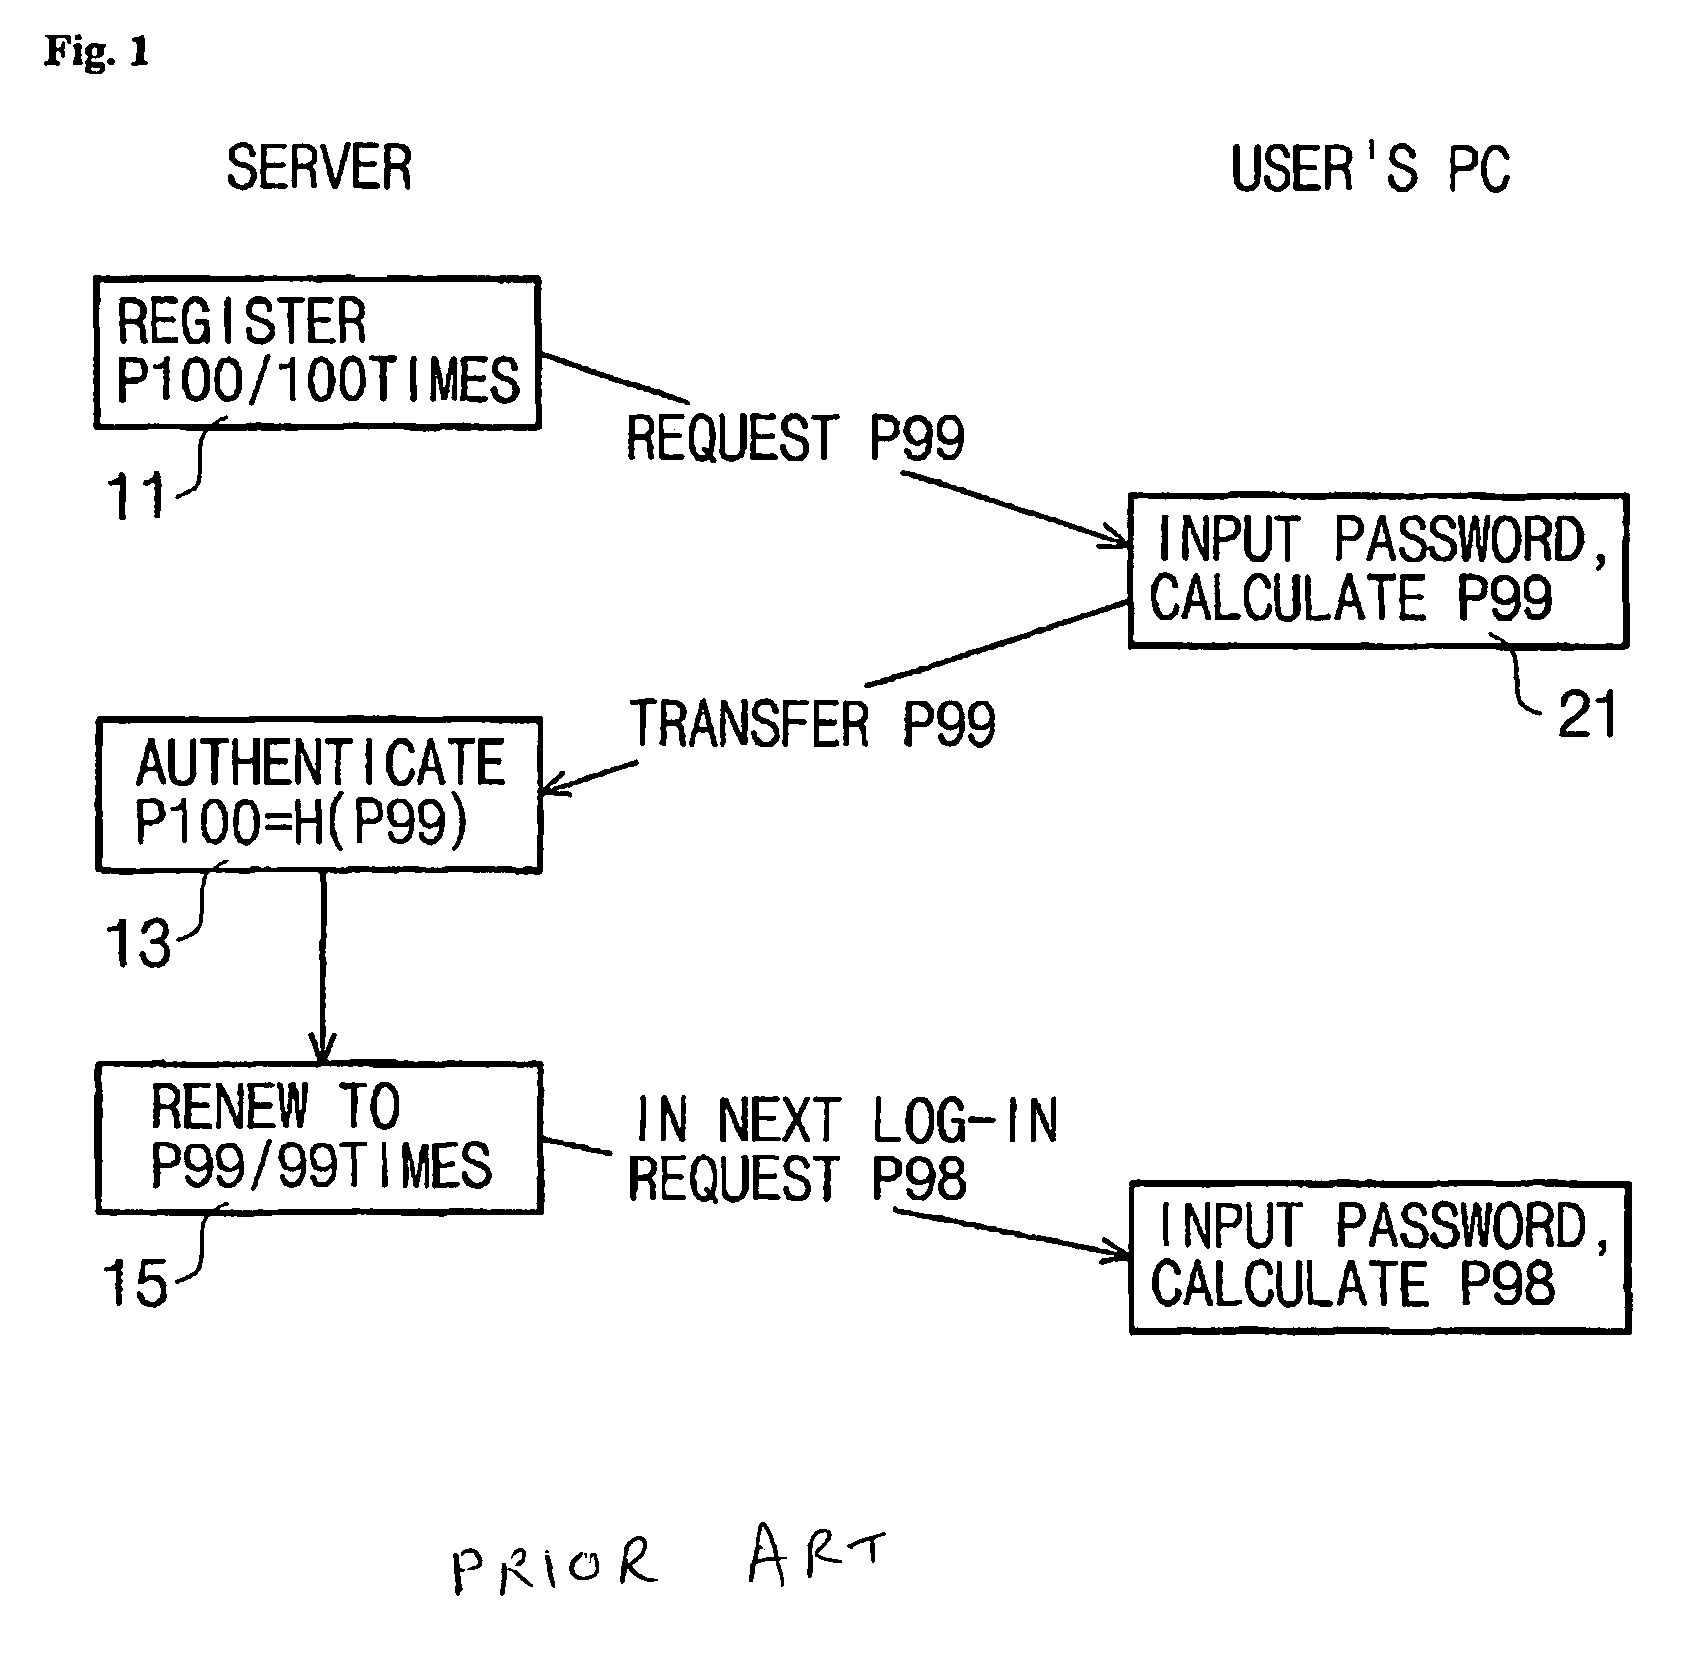 User authenticating system and method using one-time fingerprint template